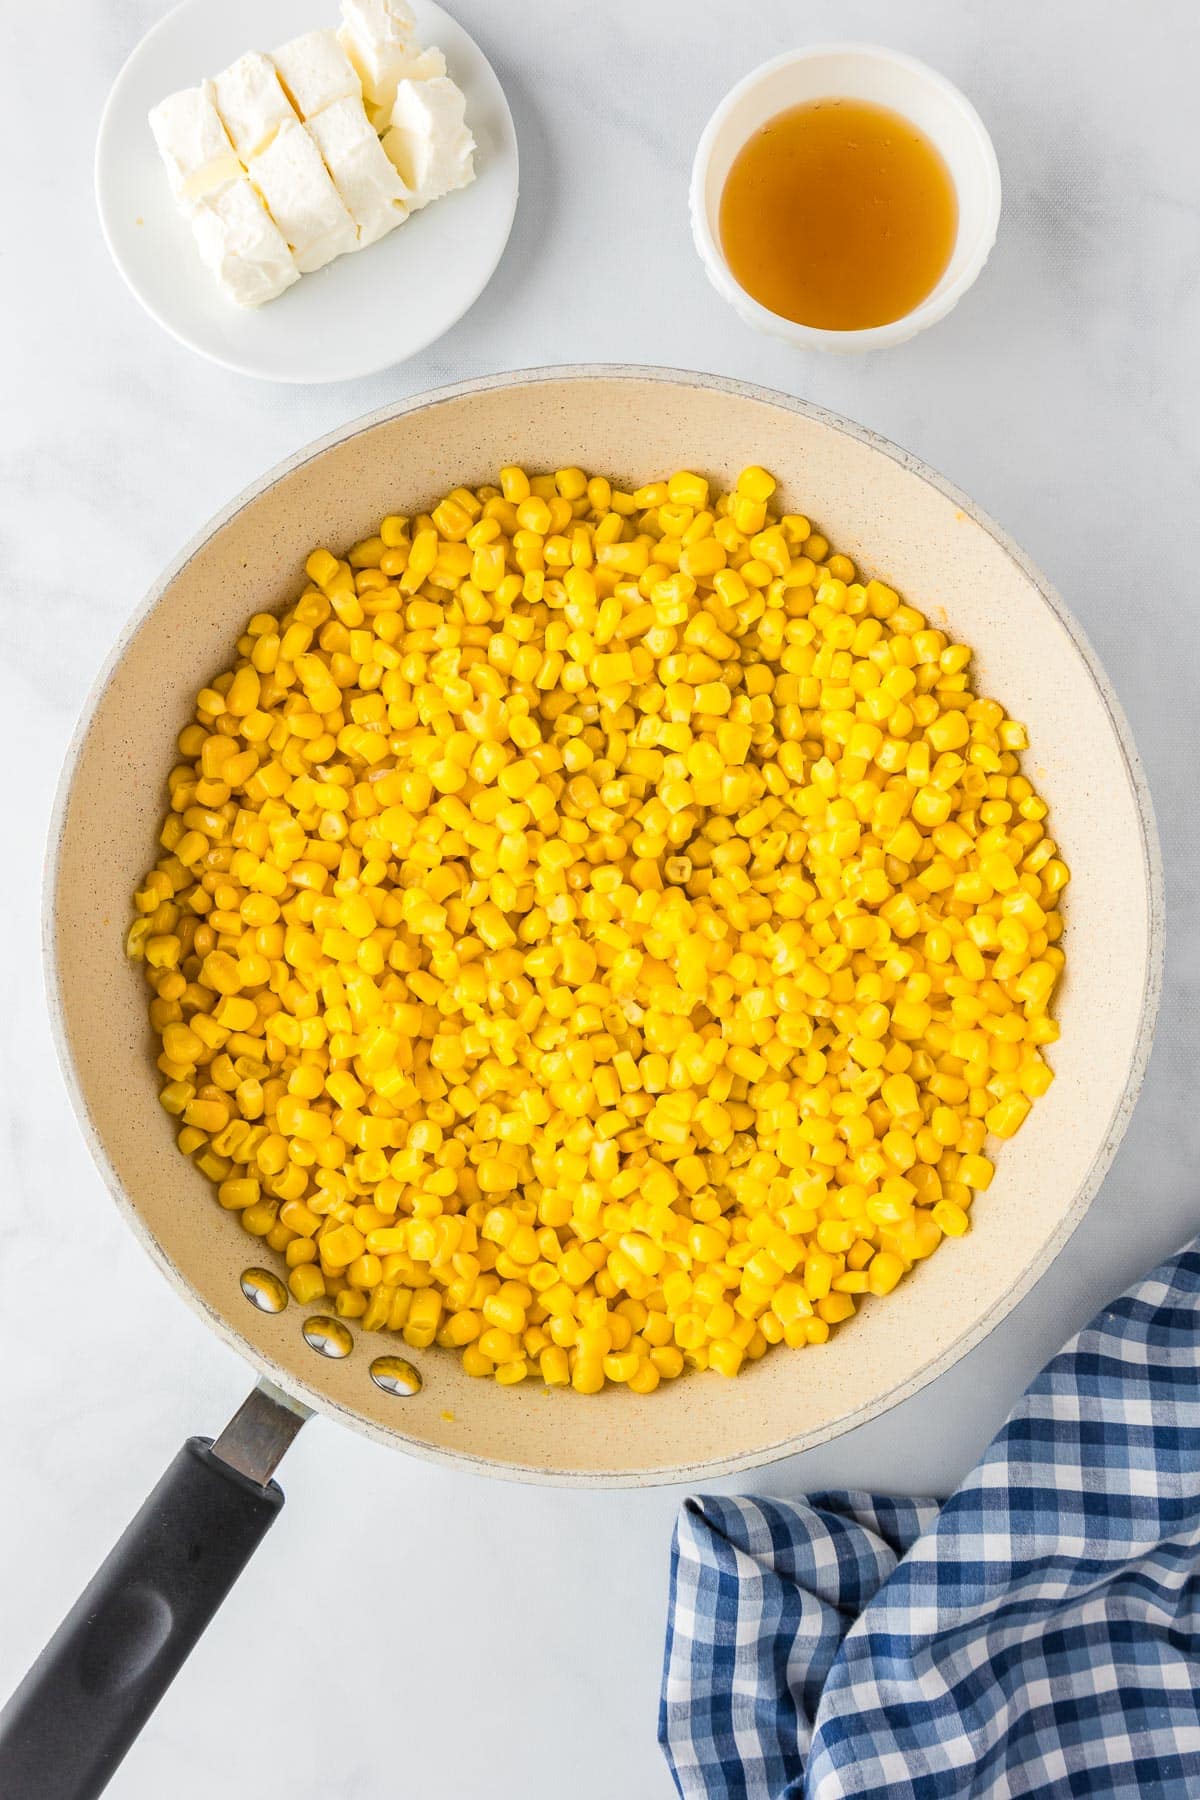 A pan filled with cooked corn kernels with cream cheese and honey in bowls nearby.